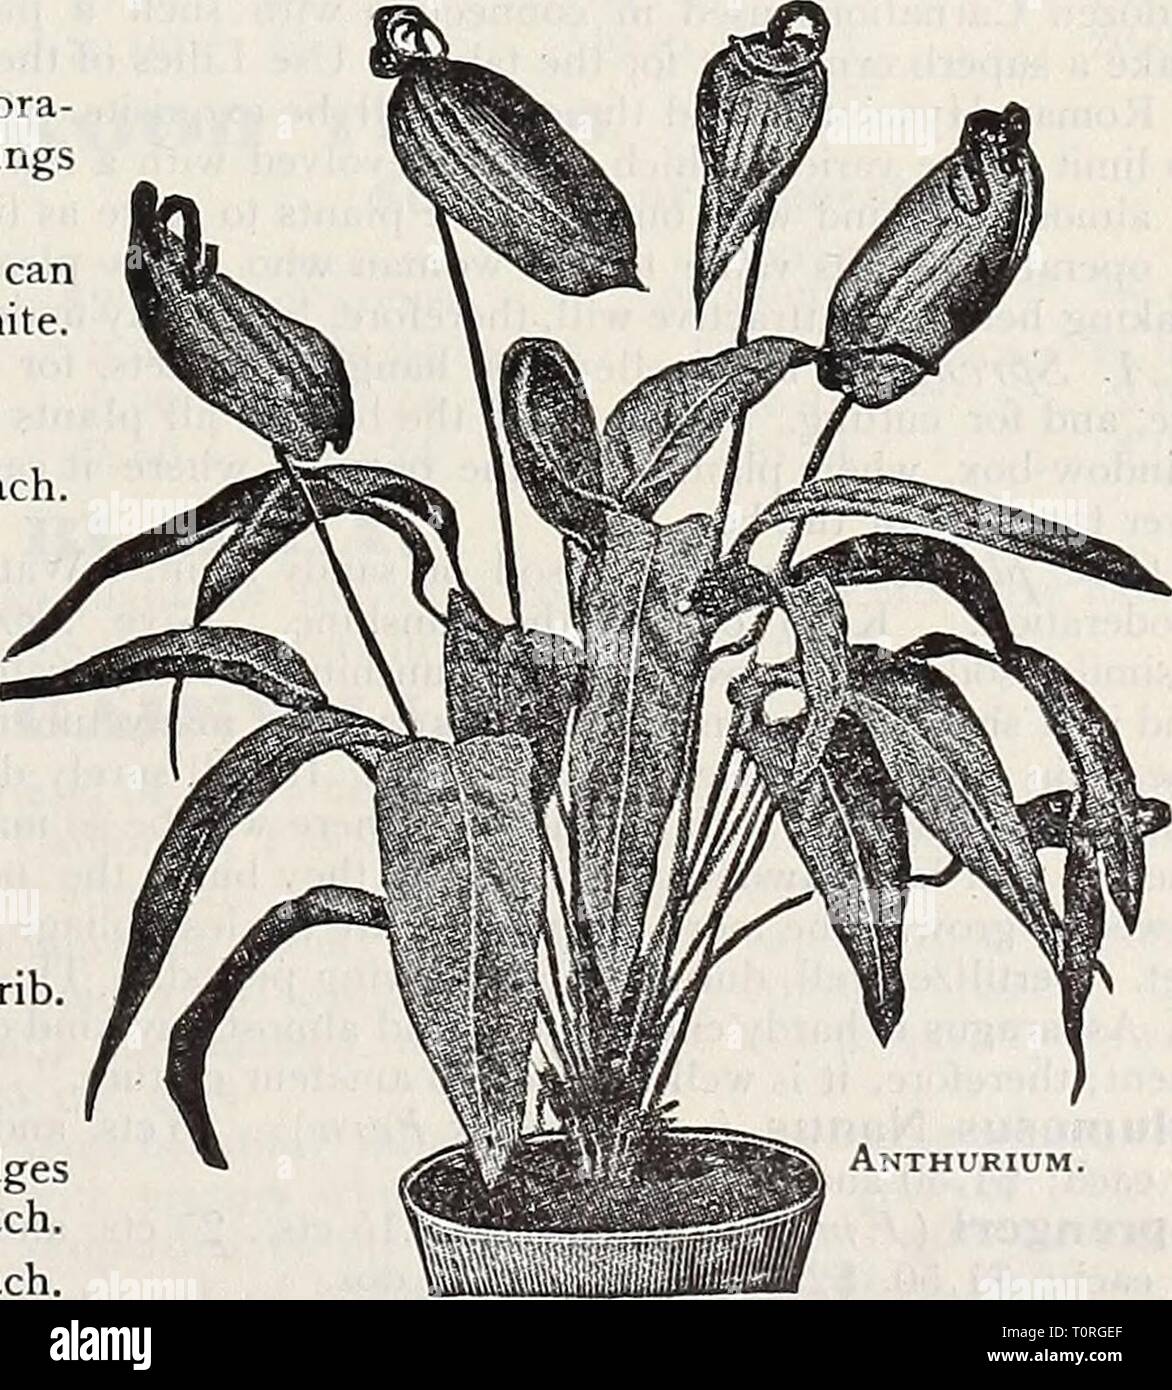 Dreer's 1909 garden book (1909) Dreer's 1909 garden book  dreers1909garden1909henr Year: 1909  Hybrid Amaryllis. Nehrling's Florida Hybrids. This grand strain is the re- sult of over 20 years' selection of crosses made between such magnificent varieties as Empress of India, Enchantress, the long-tubed, fragrant Sol andriflora, as well as the finest En- glish and Continental hybrids of more recent introduction. These crossings and re-crossings, combined with careful selec- tion, have resulted in a strain of strong, vigorous growth, producing from four to six flowers on a stalk, which are perfec Stock Photo